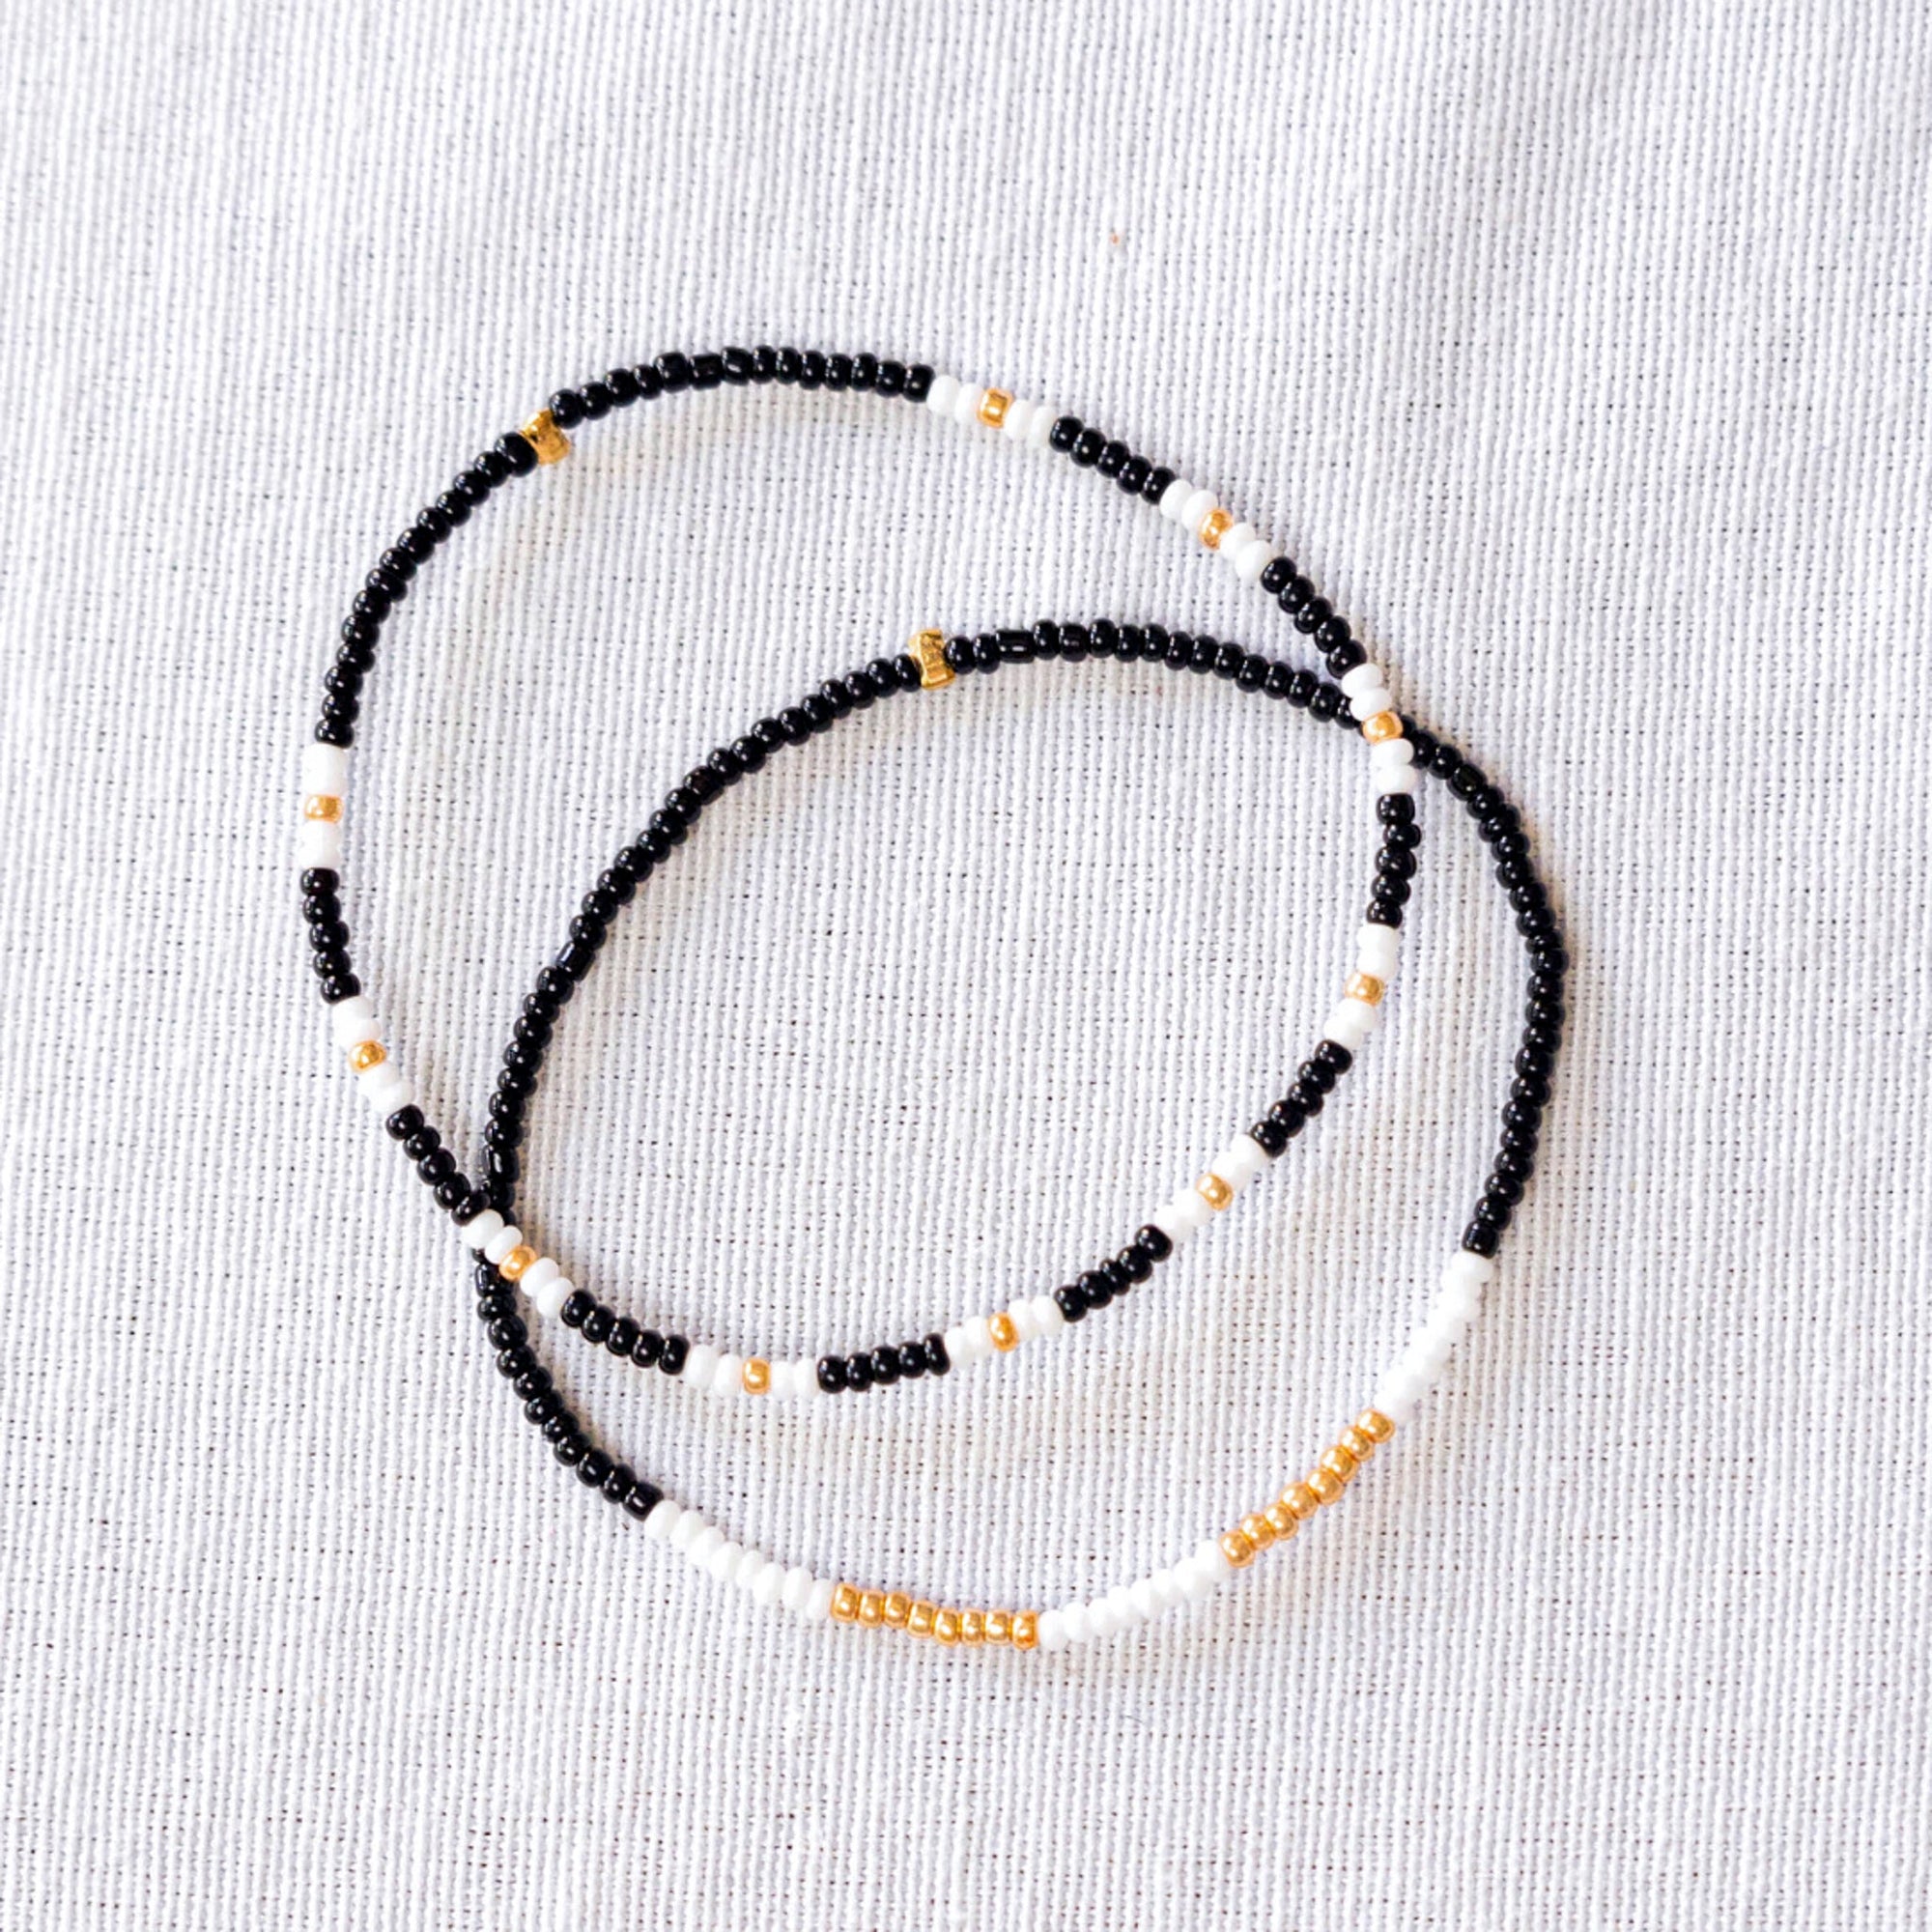 HANDMADE SET OF TWO BEADED BRACELET IN BLACK AND GOLD – shop